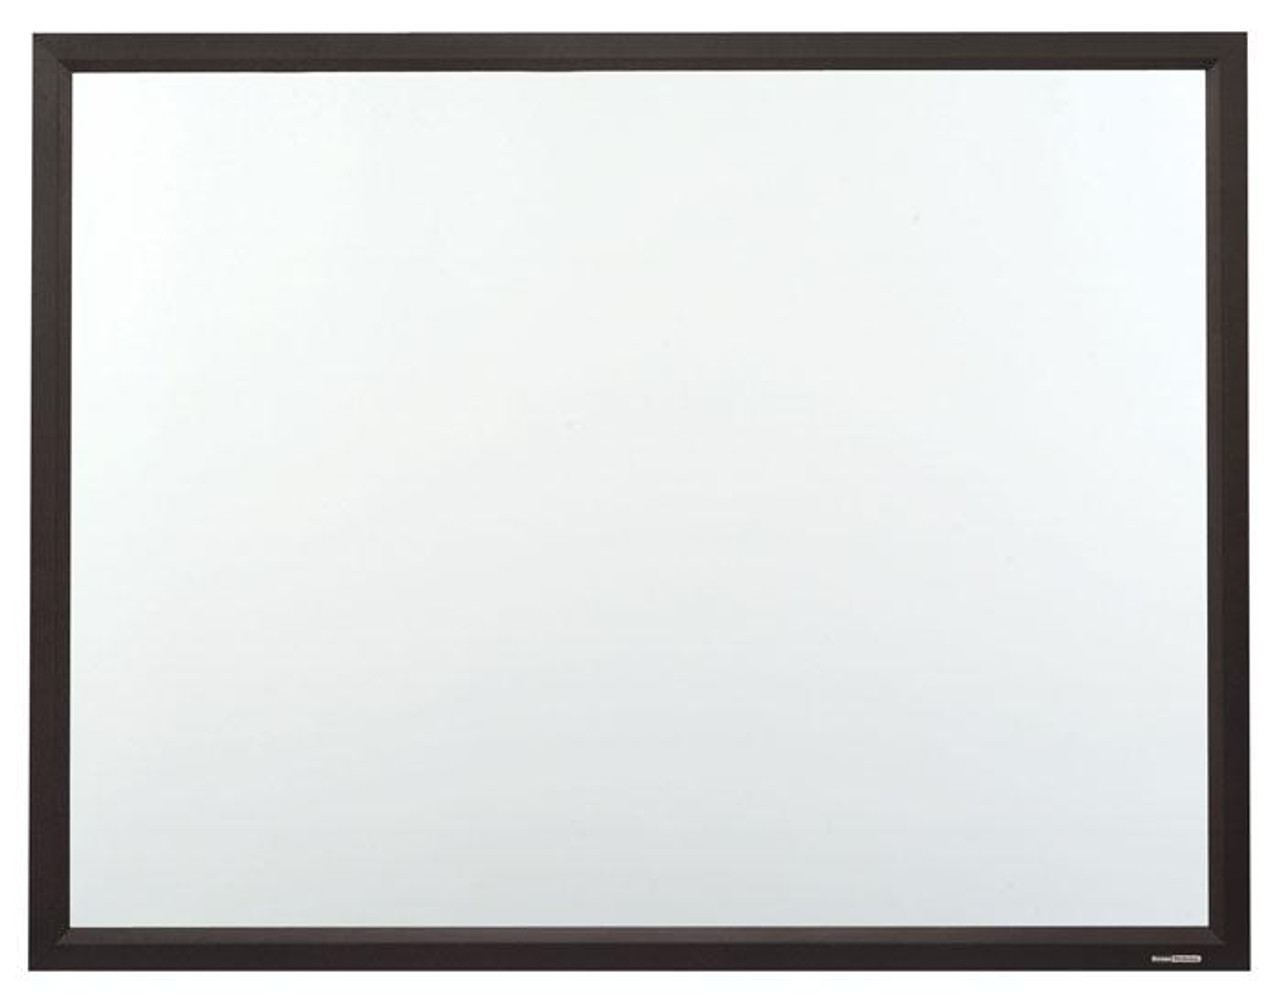 ST CinemaSnap MicroPerf White Fixed Frame Projection Screens with Black Powdercoat Finish